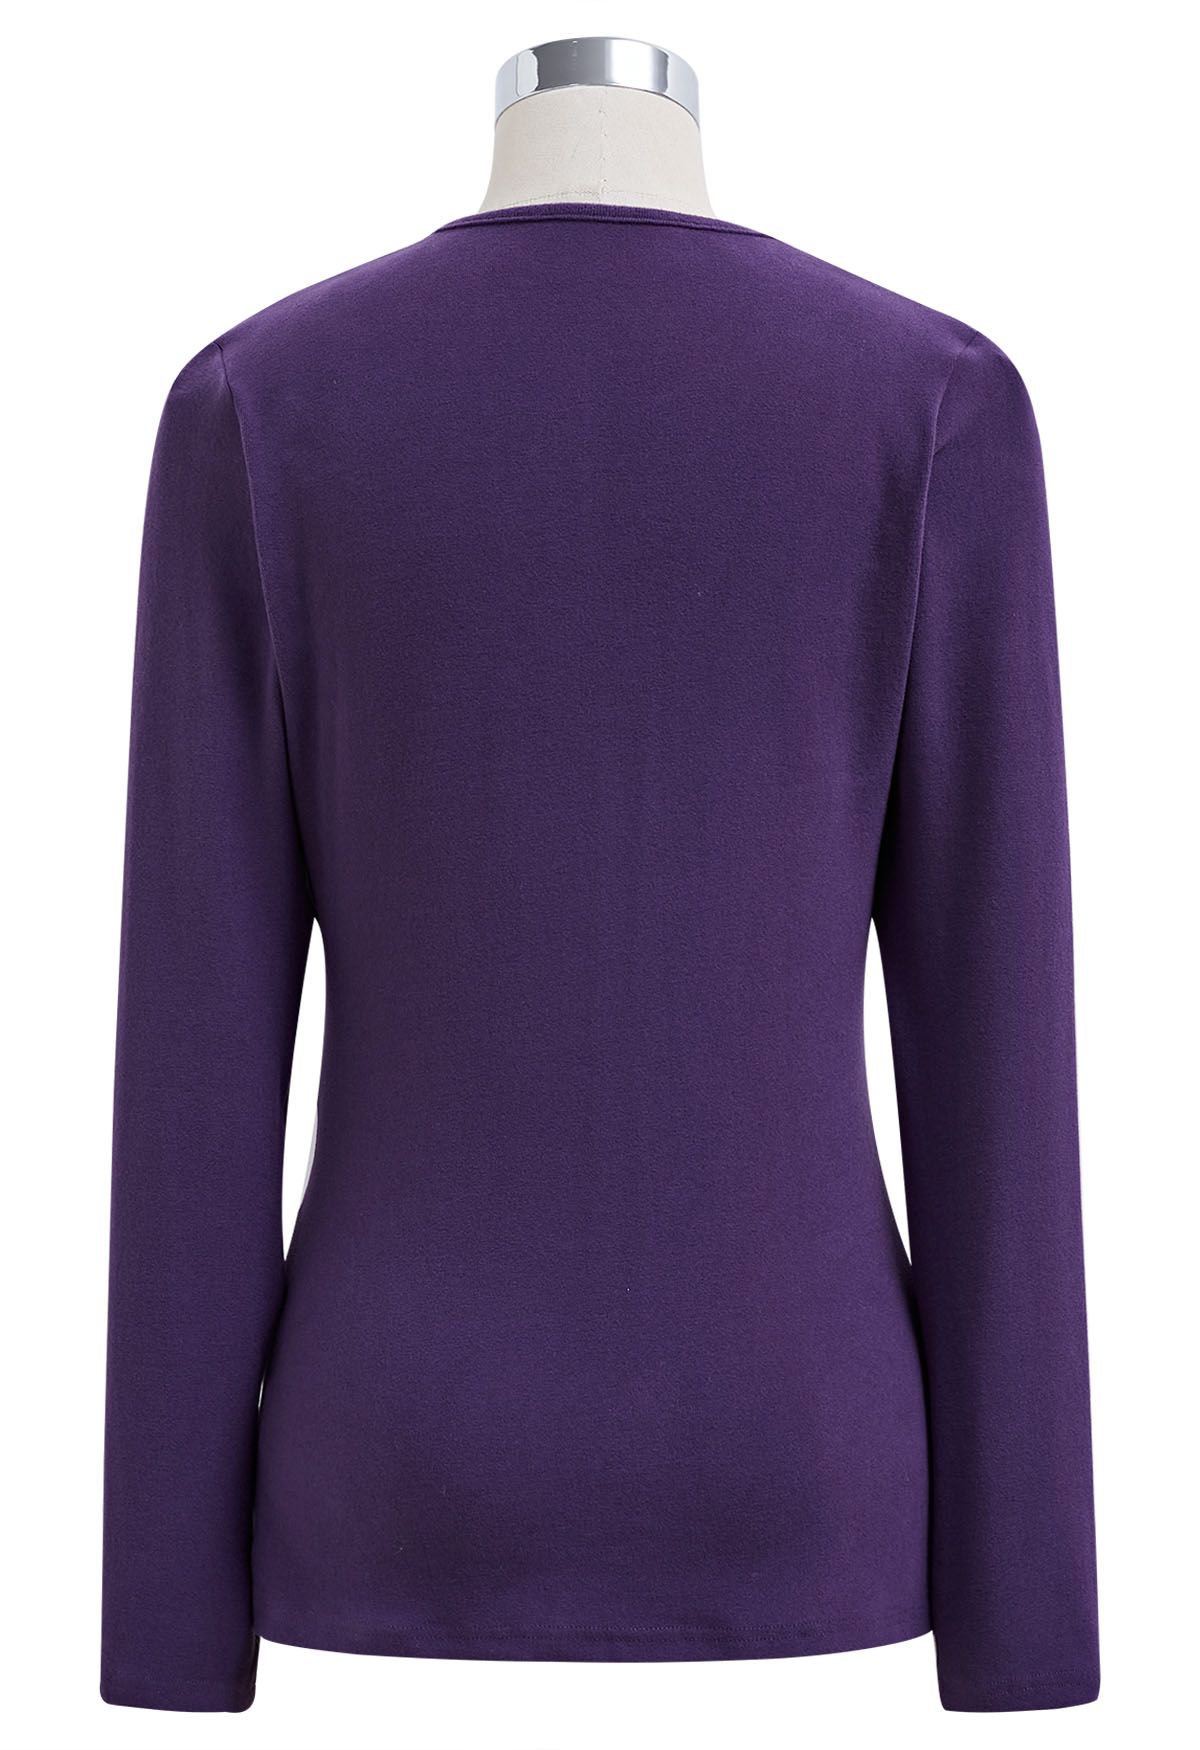 Solid Color Soft Wrap Top in Purple